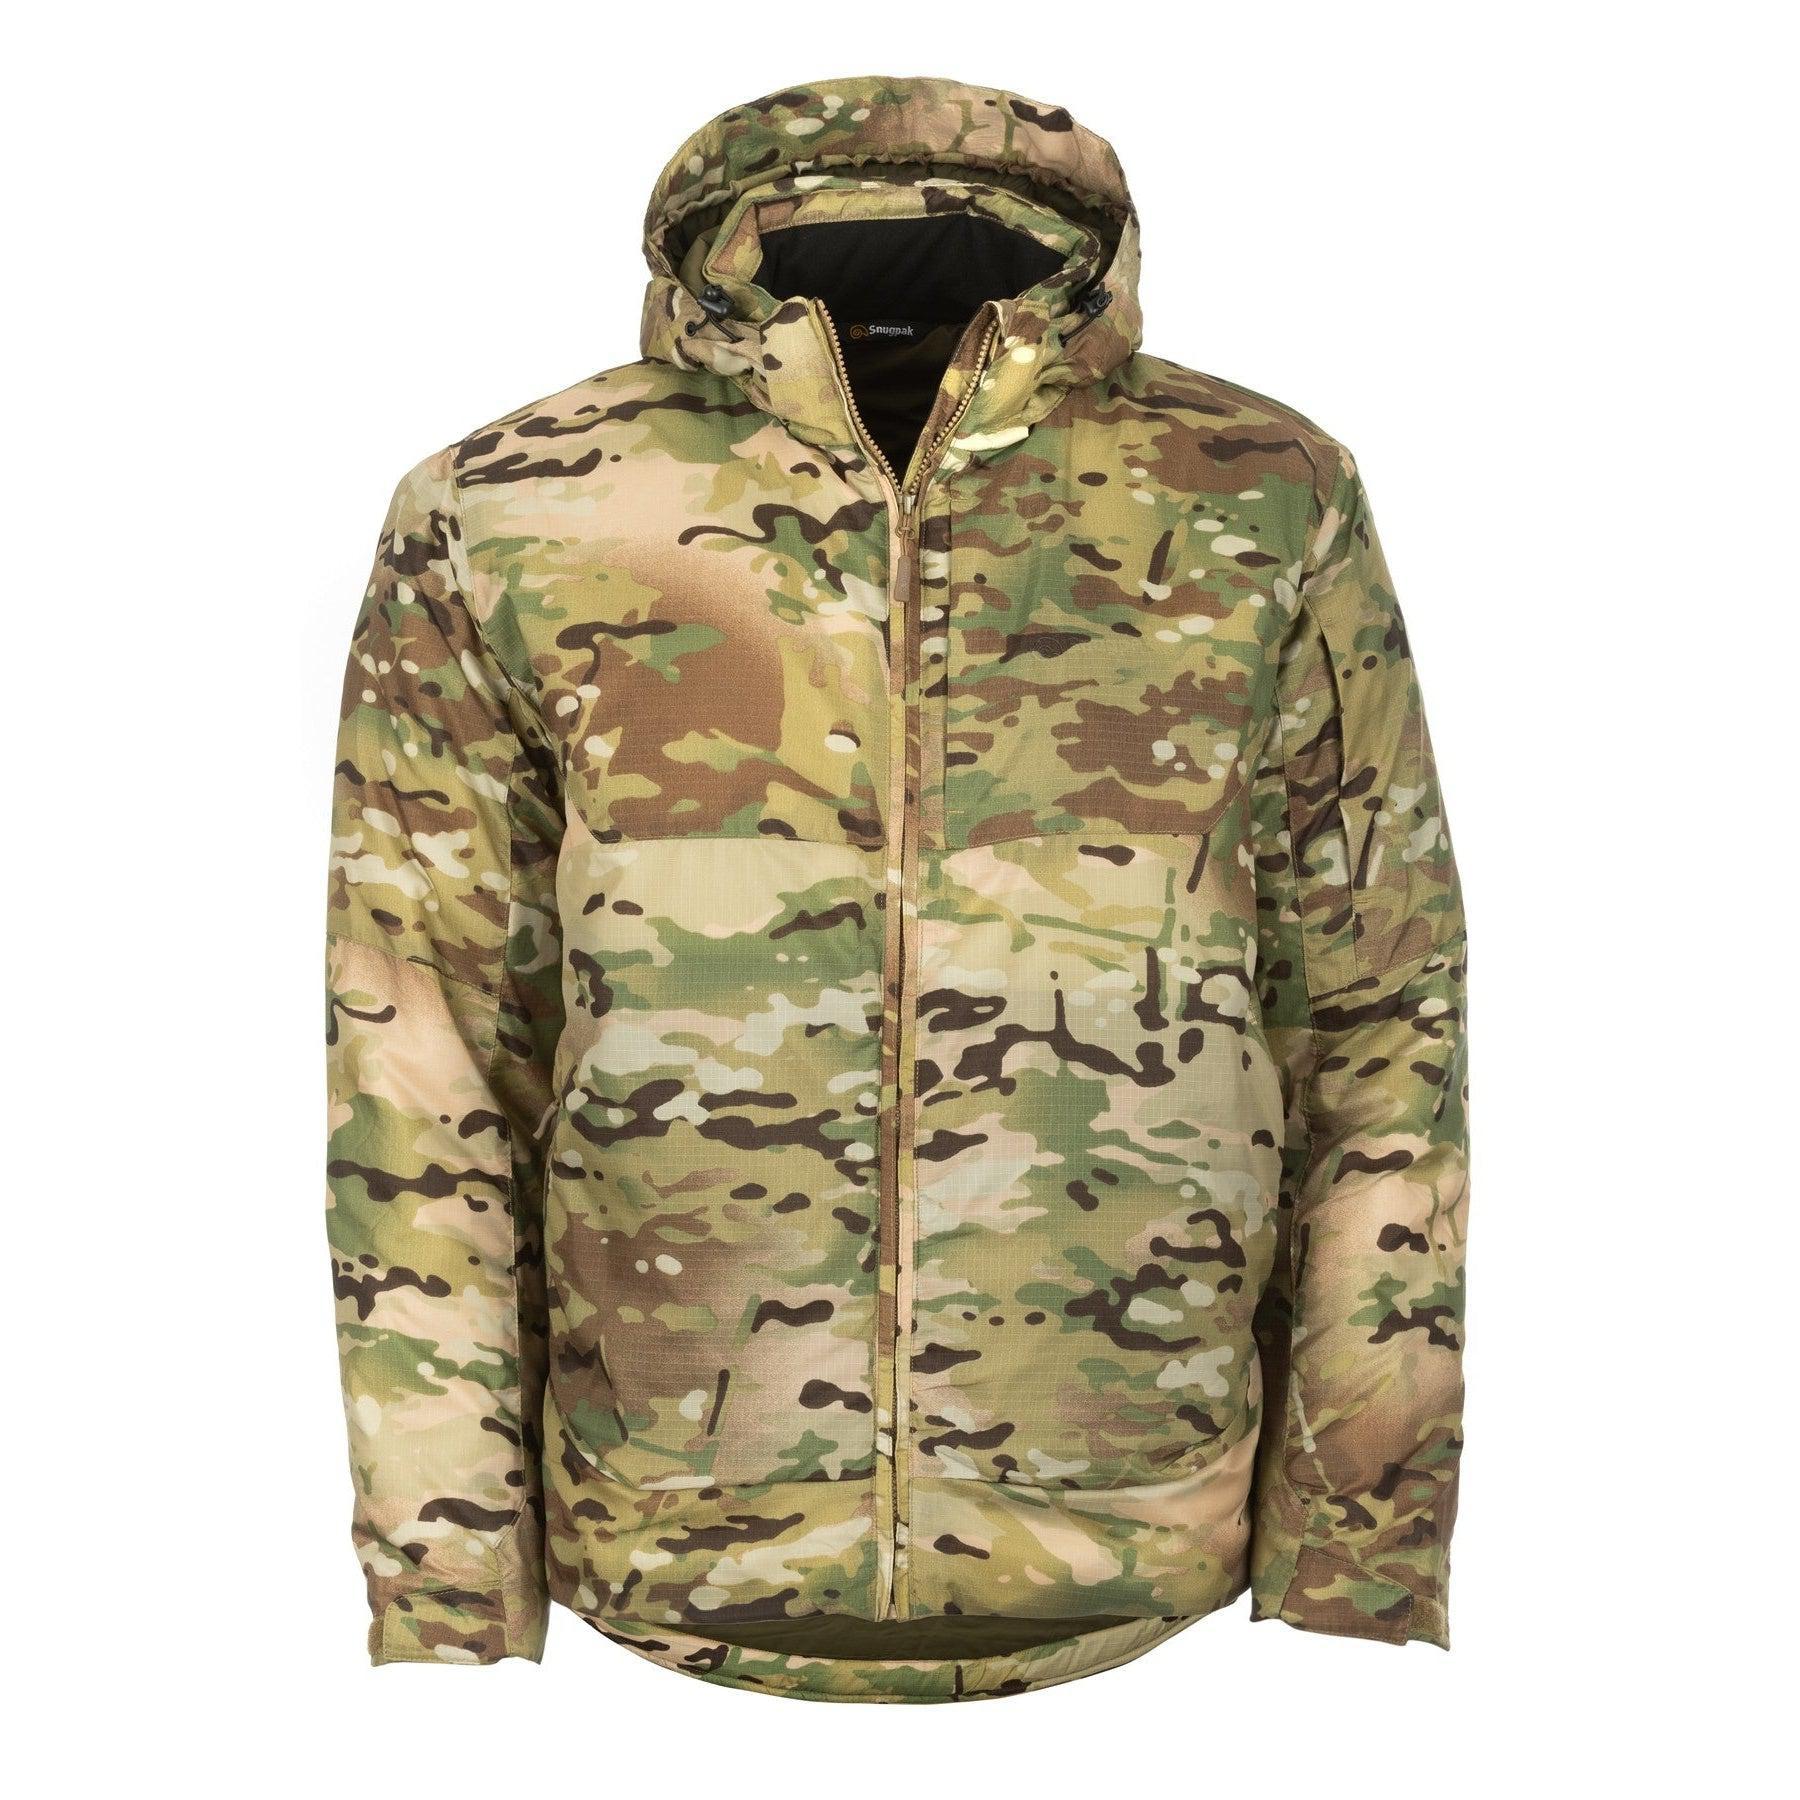 Spearhead Technical Midweight Insulated Jacket - Multicam -10°C To -15